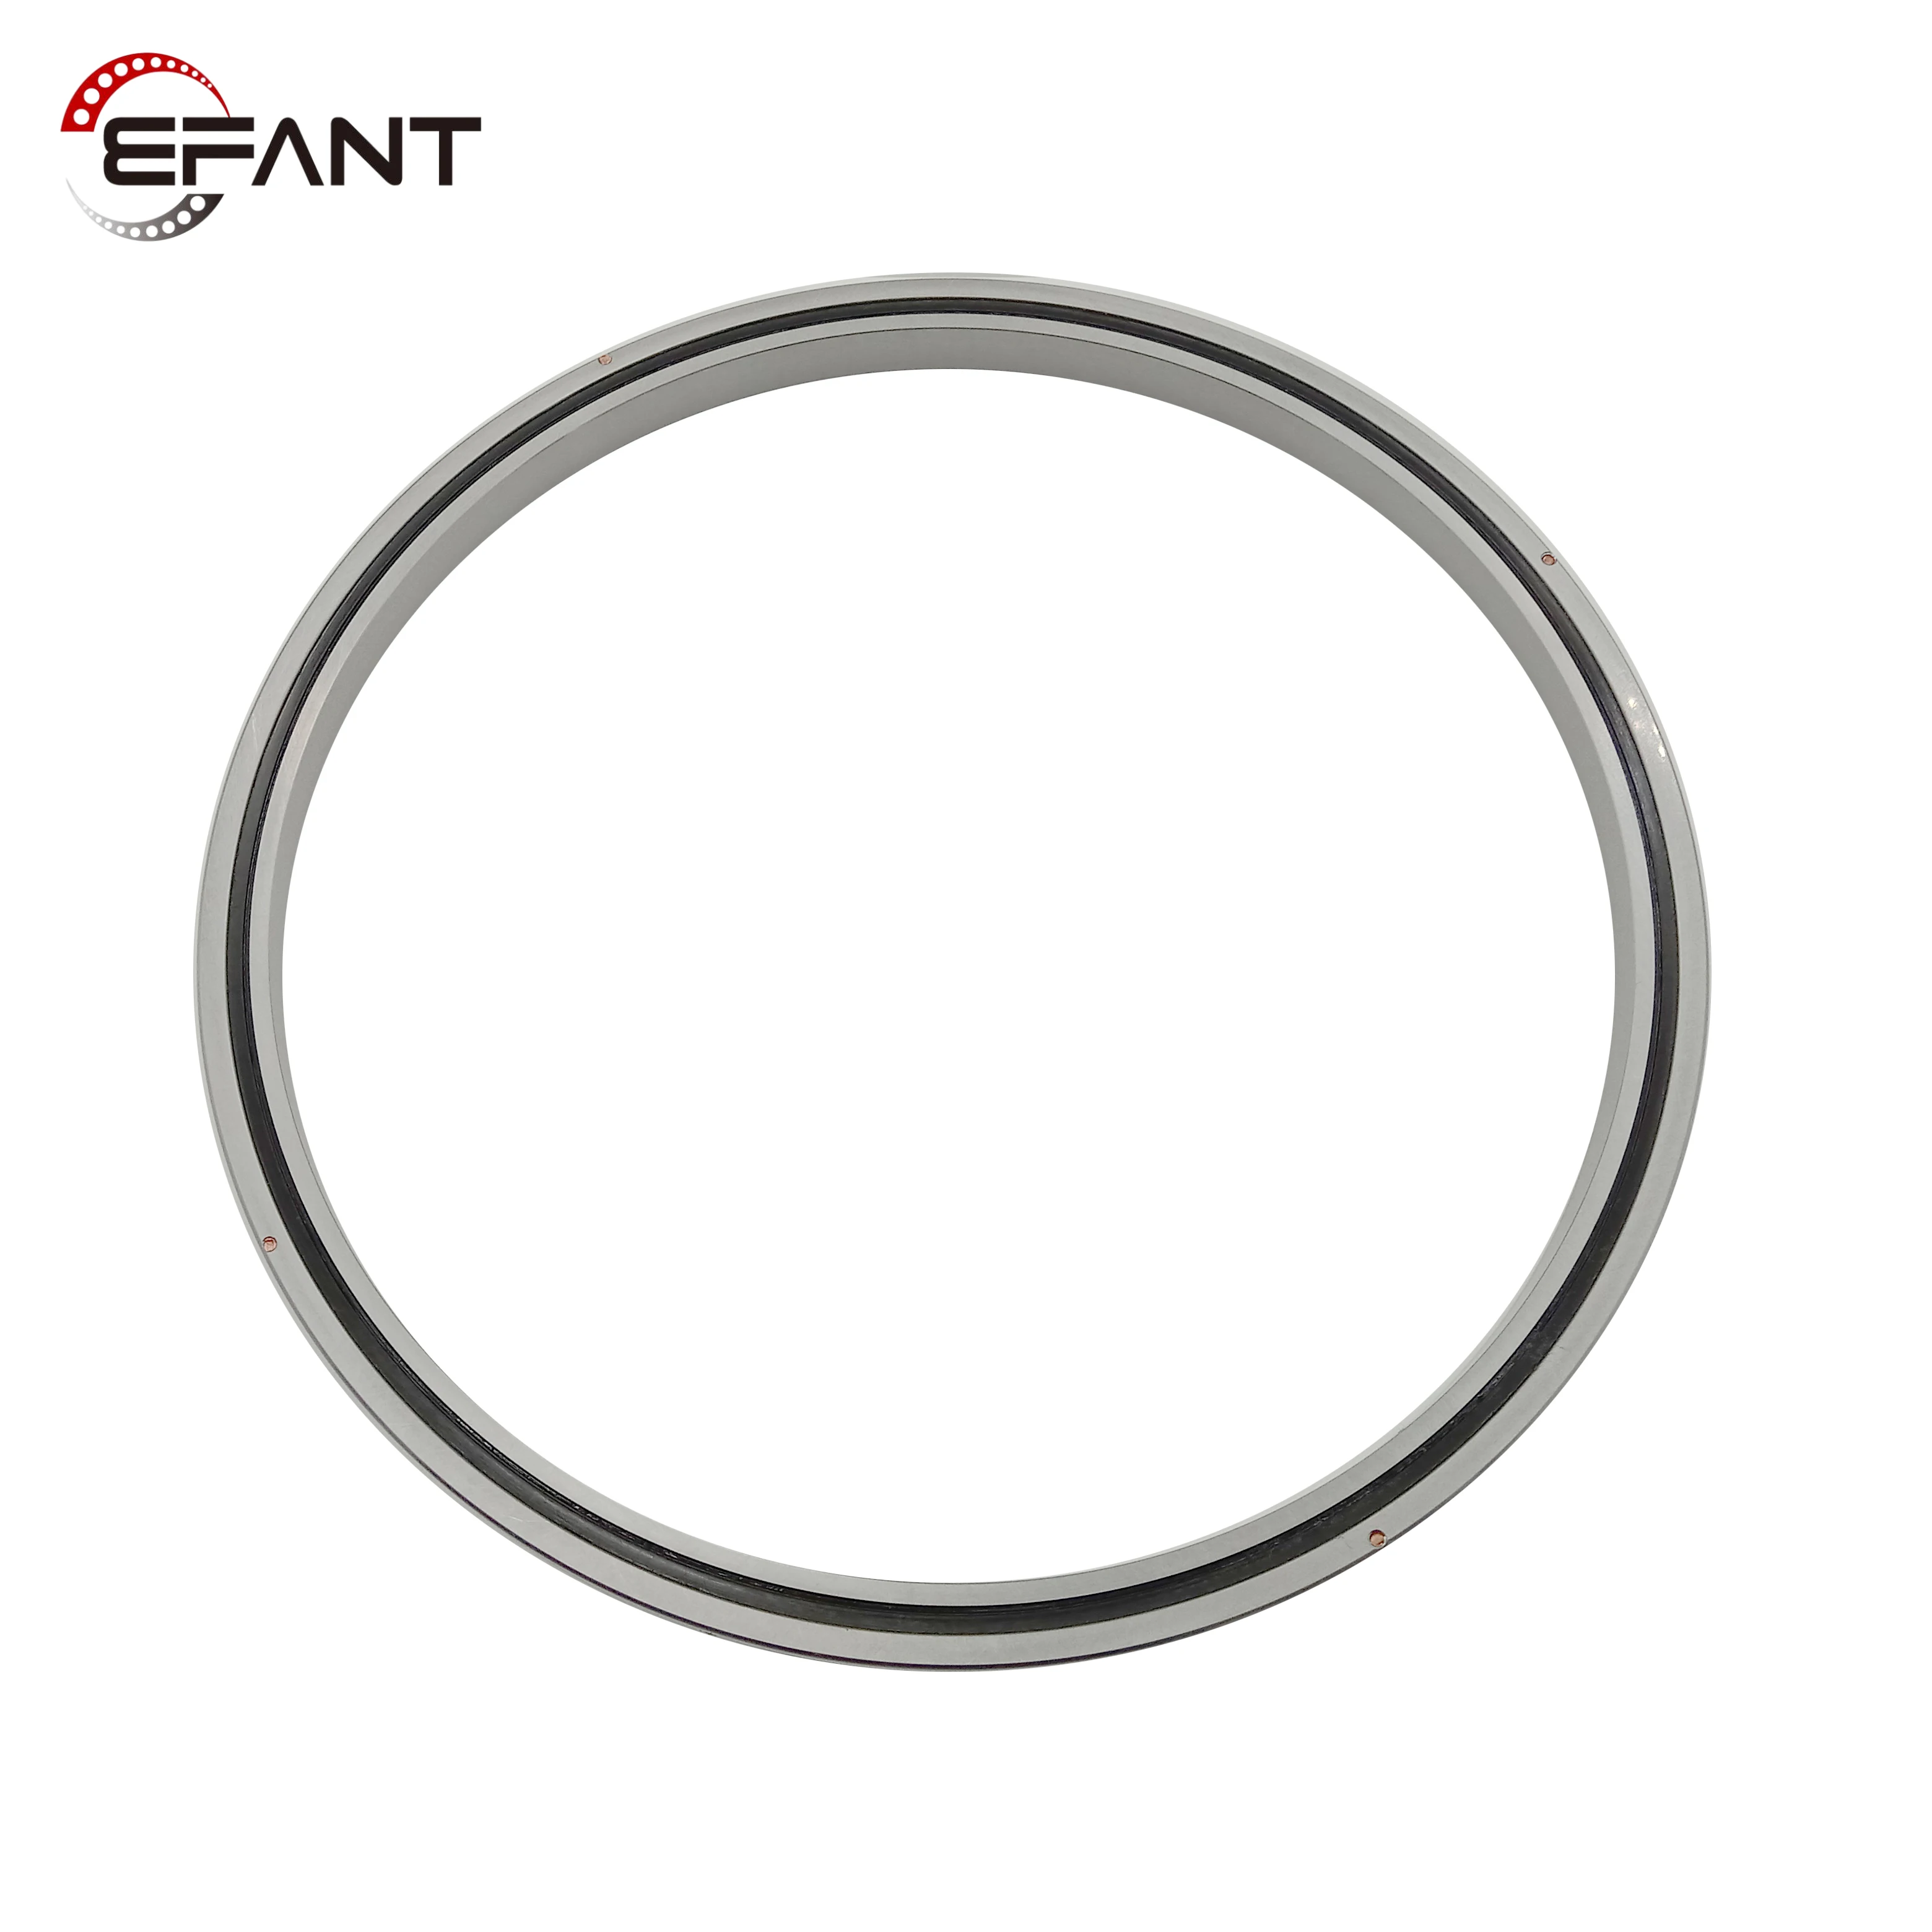 

Luoyang EFANT ON STOCK Combined axial/radial bearing RA15008 CRBS1508A cross roller ring bearing